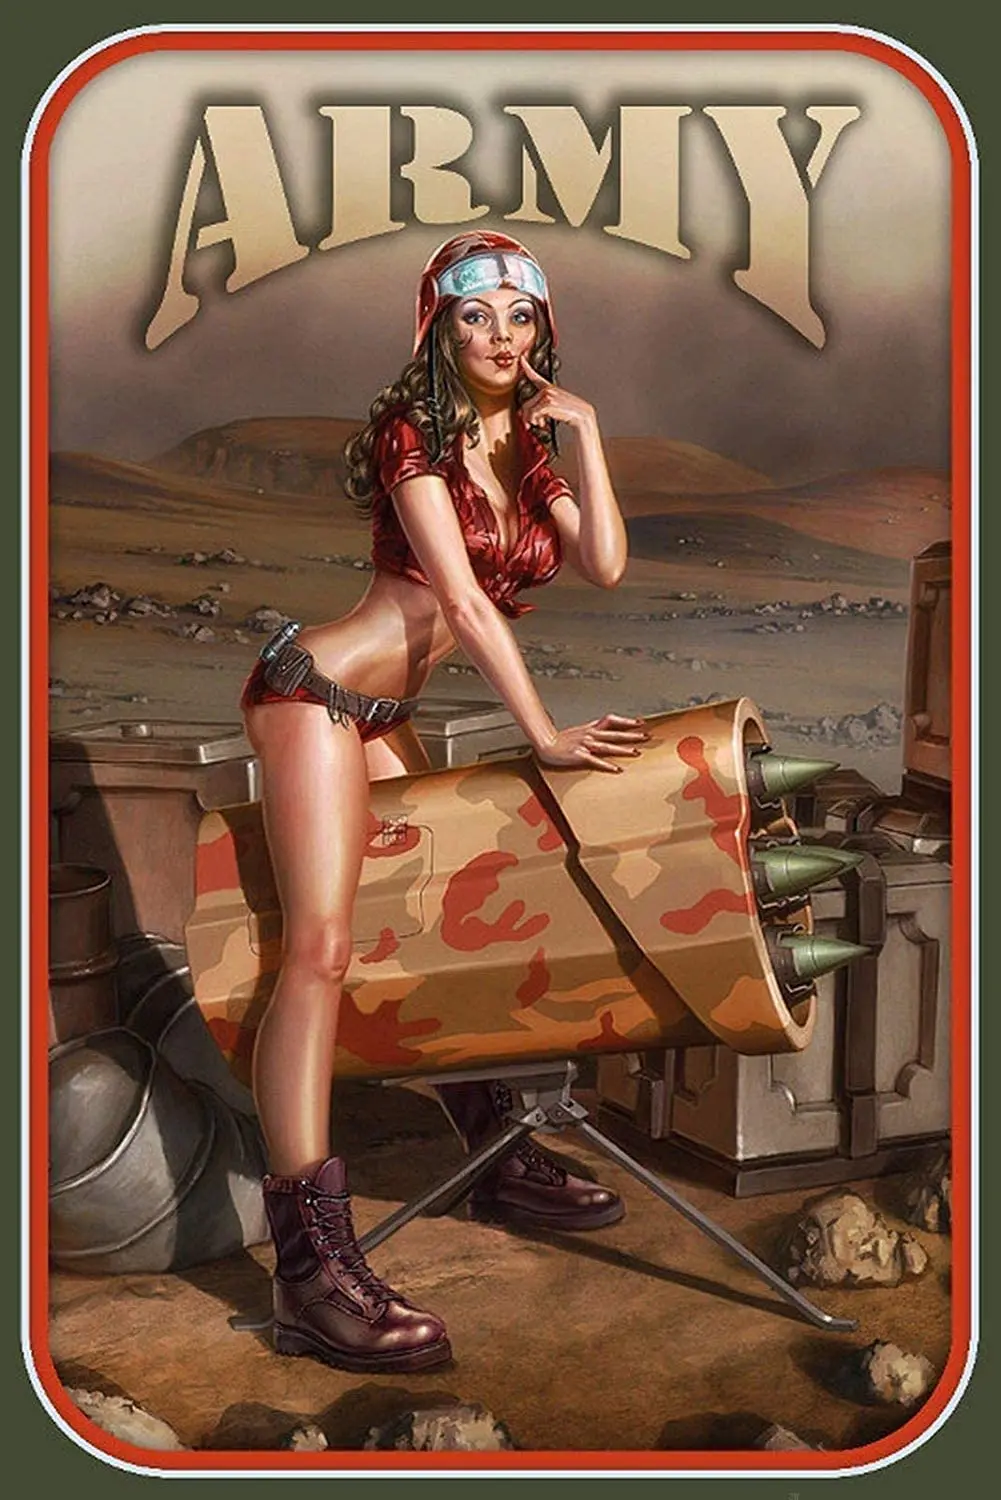 

Xuship PiN Up GiRl Posters Garage Signs for Men Sexy Bar Signs for Home Decor